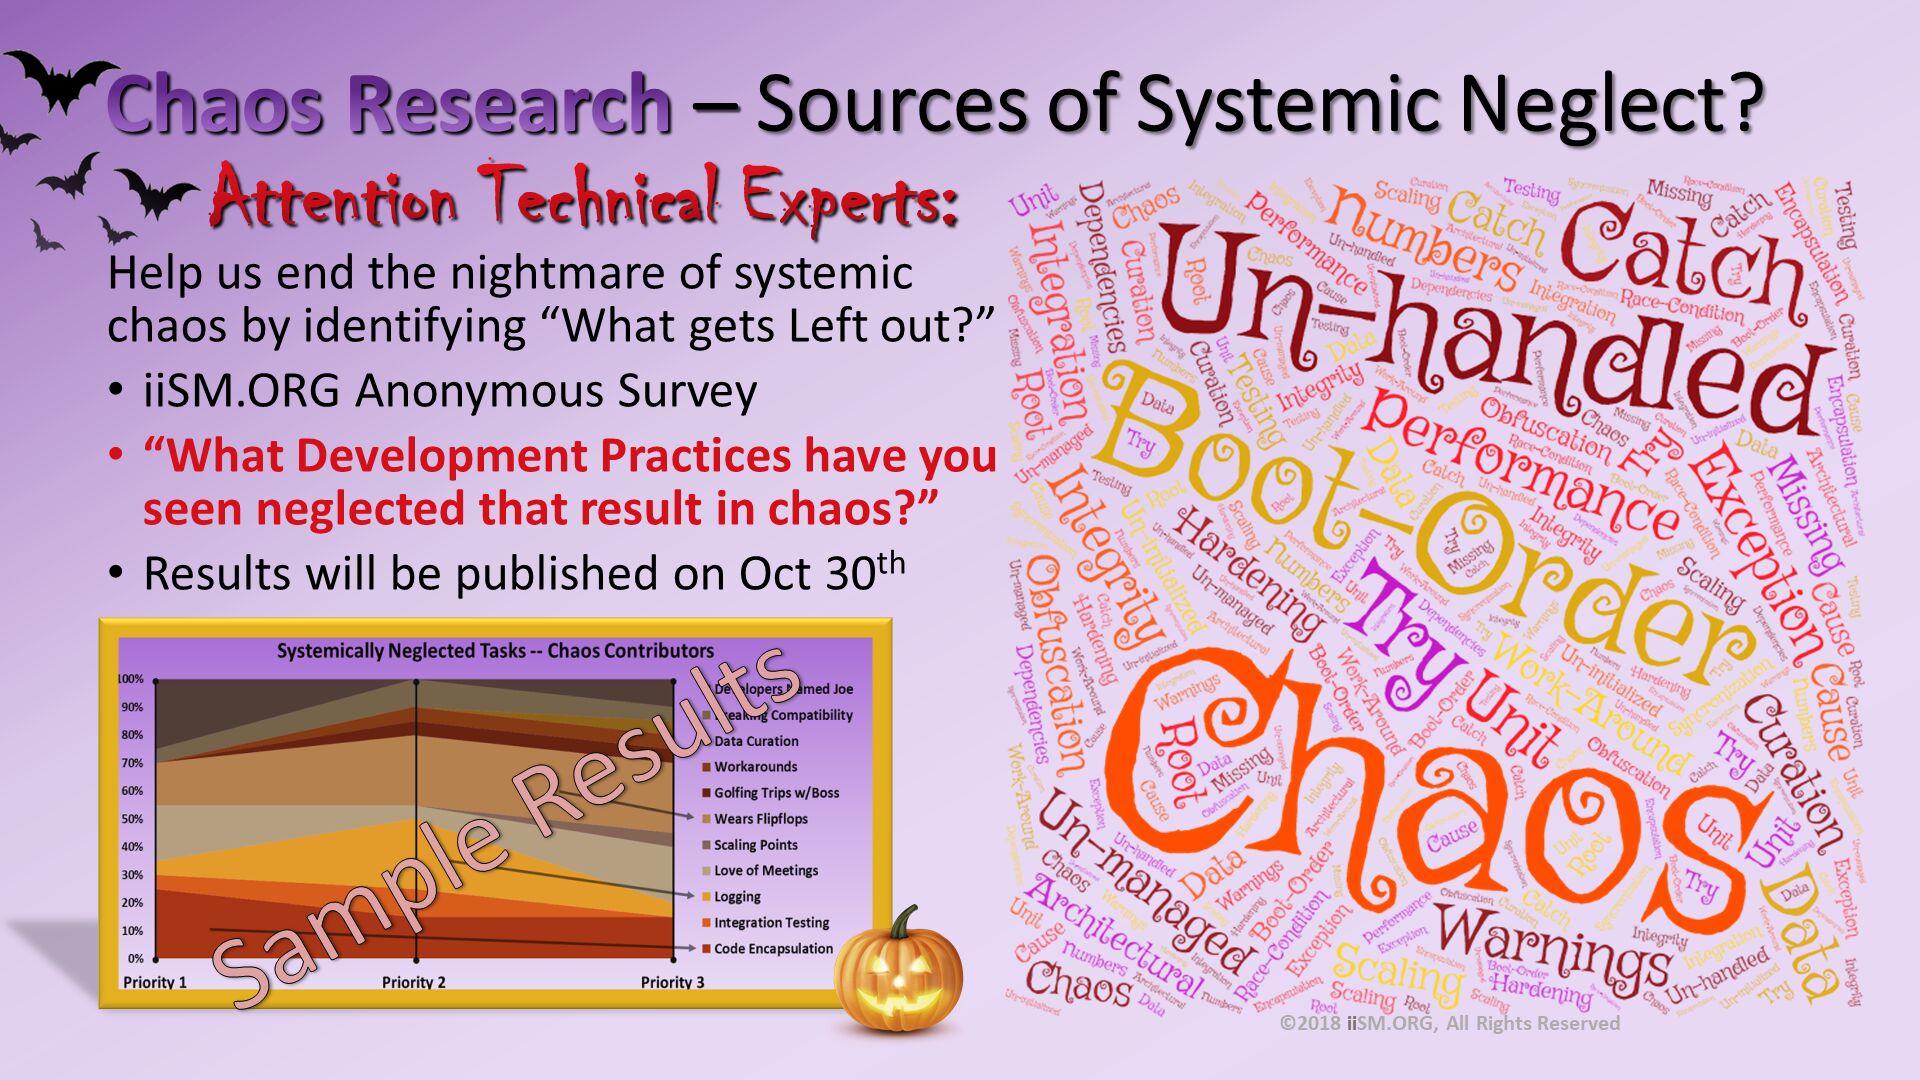 Chaos Research – Sources of Systemic Neglect?.     Attention Technical Experts: 
Help us end the nightmare of systemic chaos by identifying “What gets Left out?”
iiSM.ORG Anonymous Survey
“What Development Practices have you seen neglected that result in chaos?”
Results will be published on Oct 30th . ©2018 iiSM.ORG, All Rights Reserved. Sample Results. 